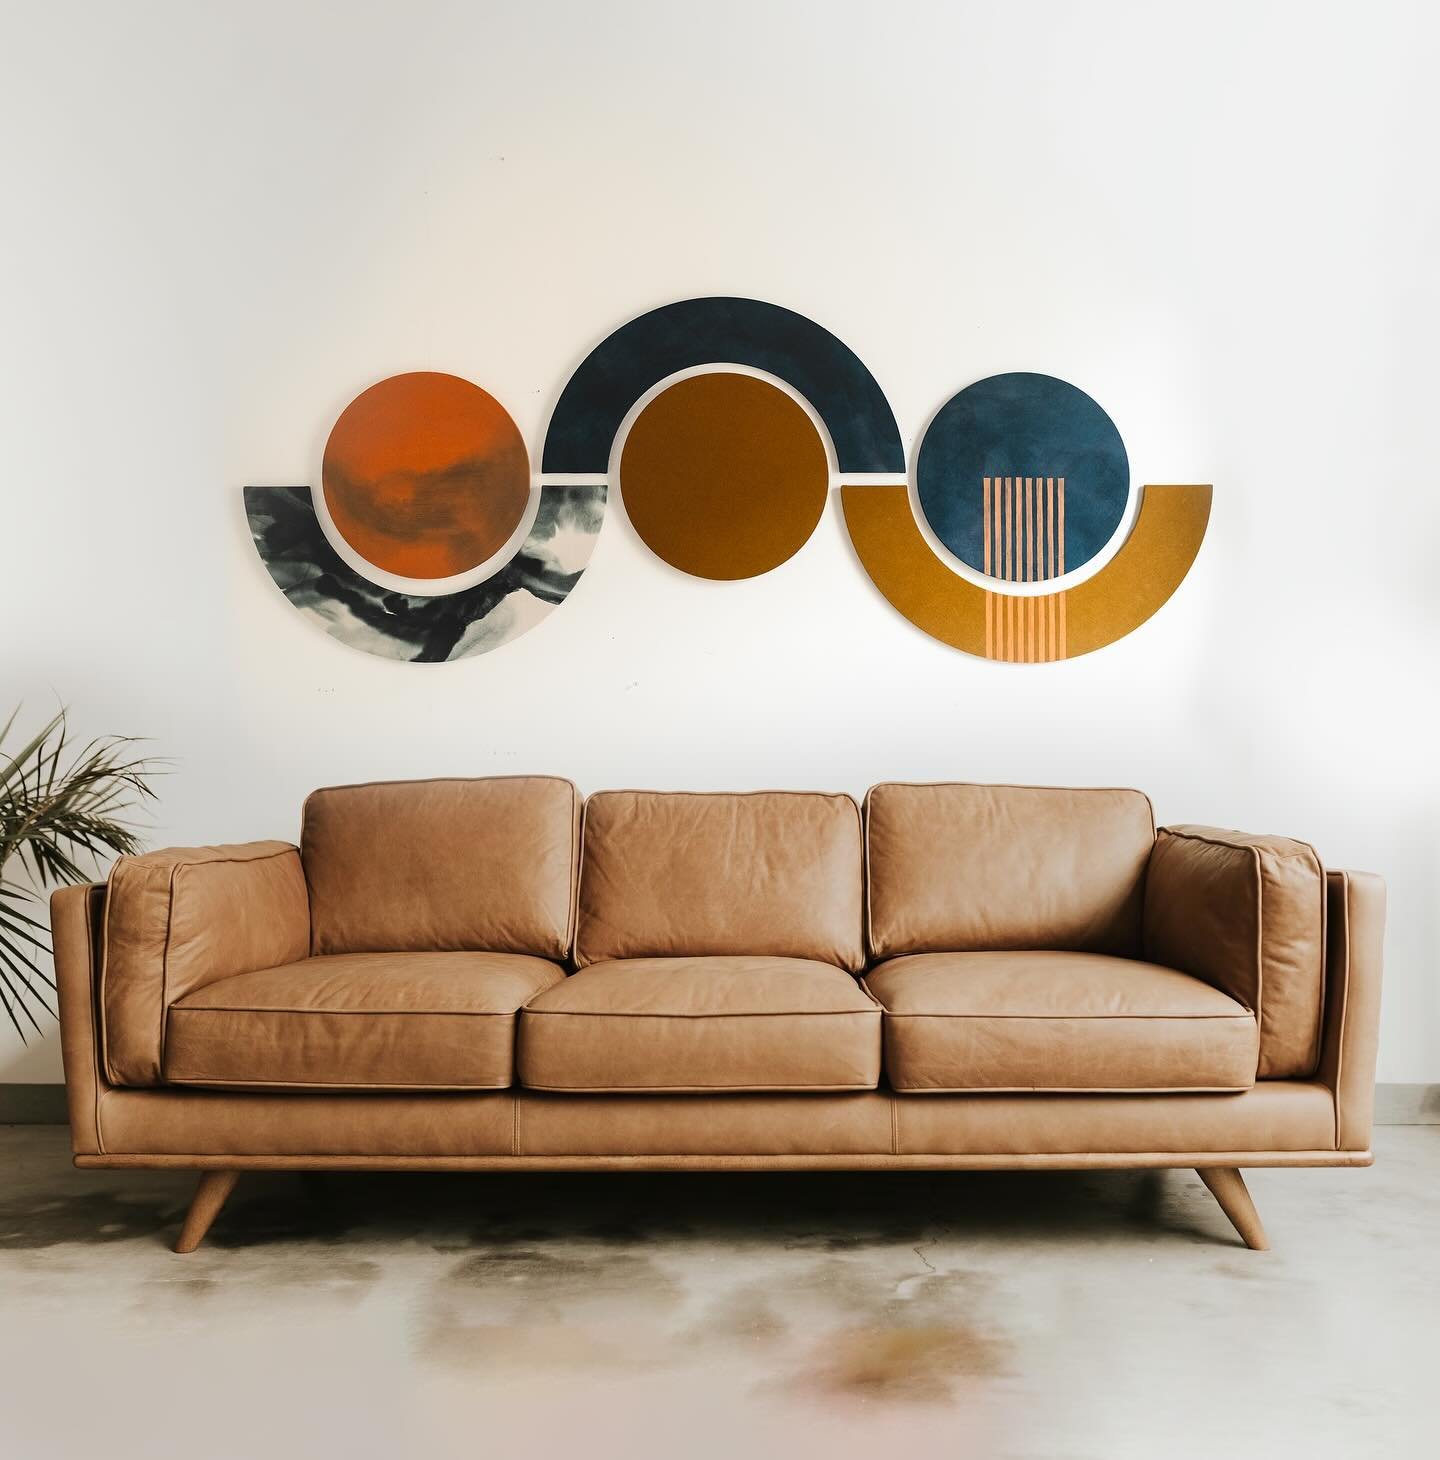 Wall Sculpture No. 2 (28&rdquo;H x 74&rdquo; W) is now listed for sale on my site! This piece would look so good over a couch or bed or anywhere else that&rsquo;s asking for a focal point. If you have any ideas for your own space send me a photo and 